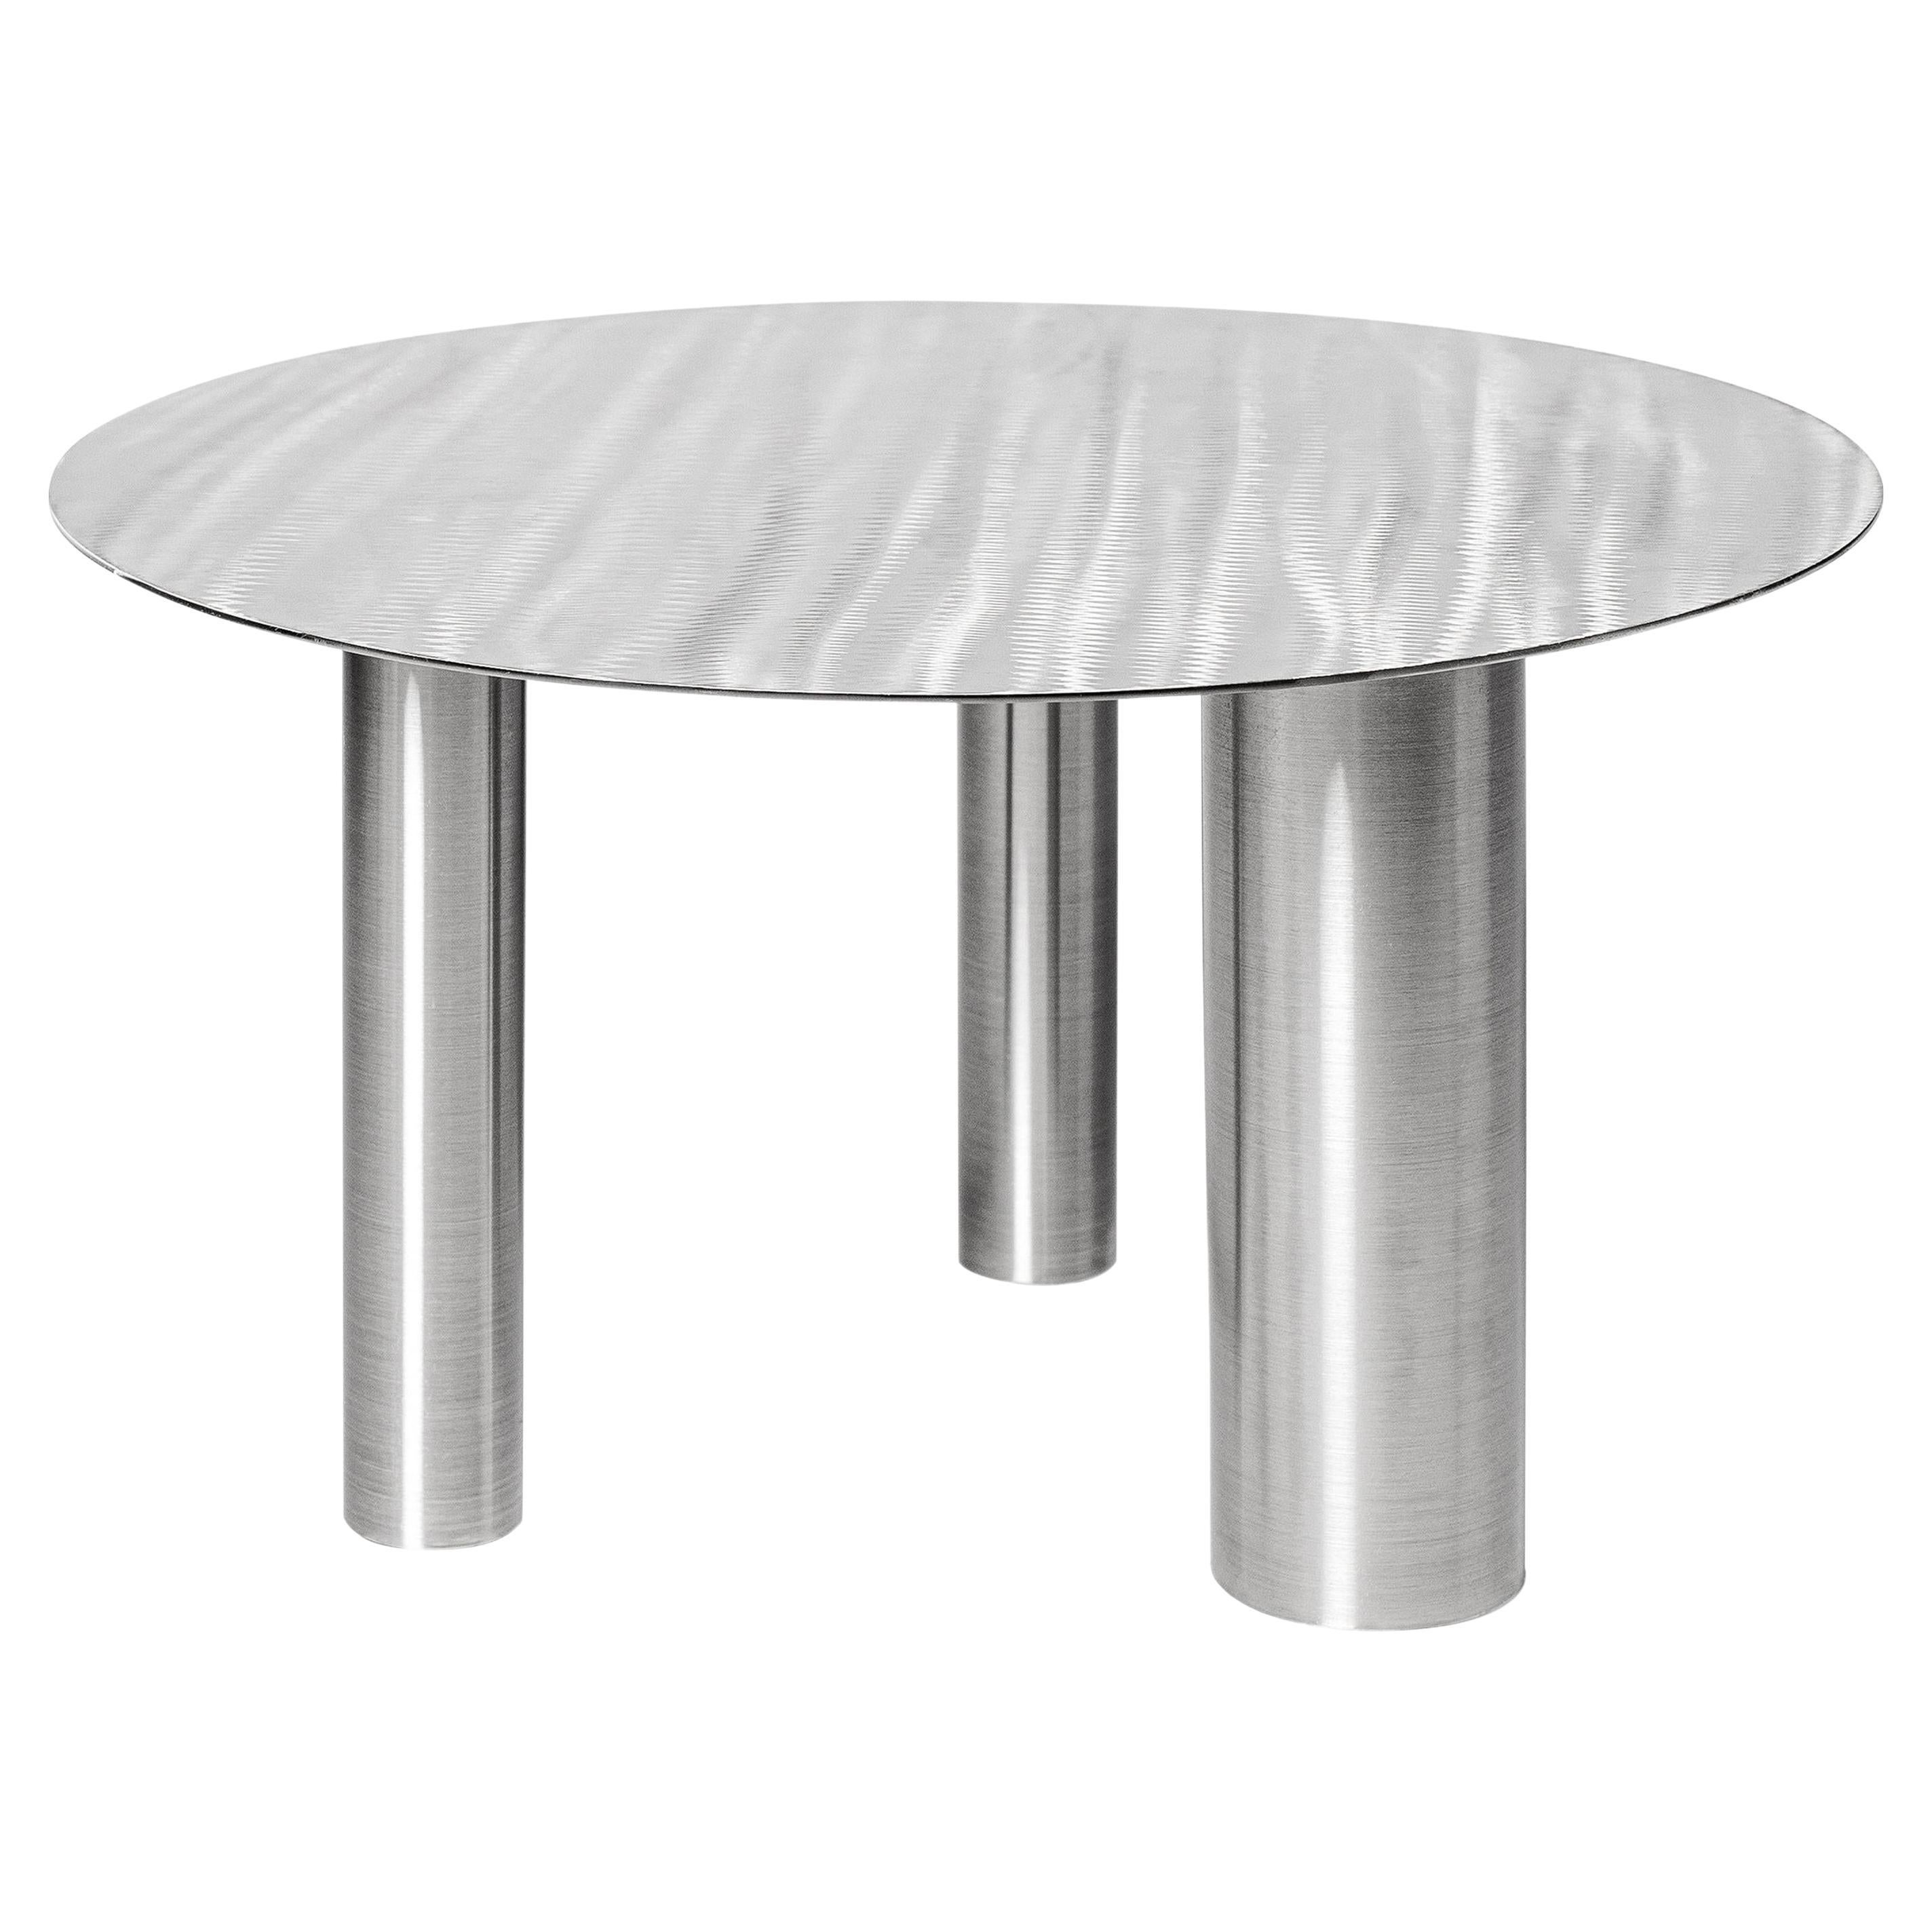 Contemporary Coffee Low Table 'Brandt CS1' by Noom, Stainless Steel